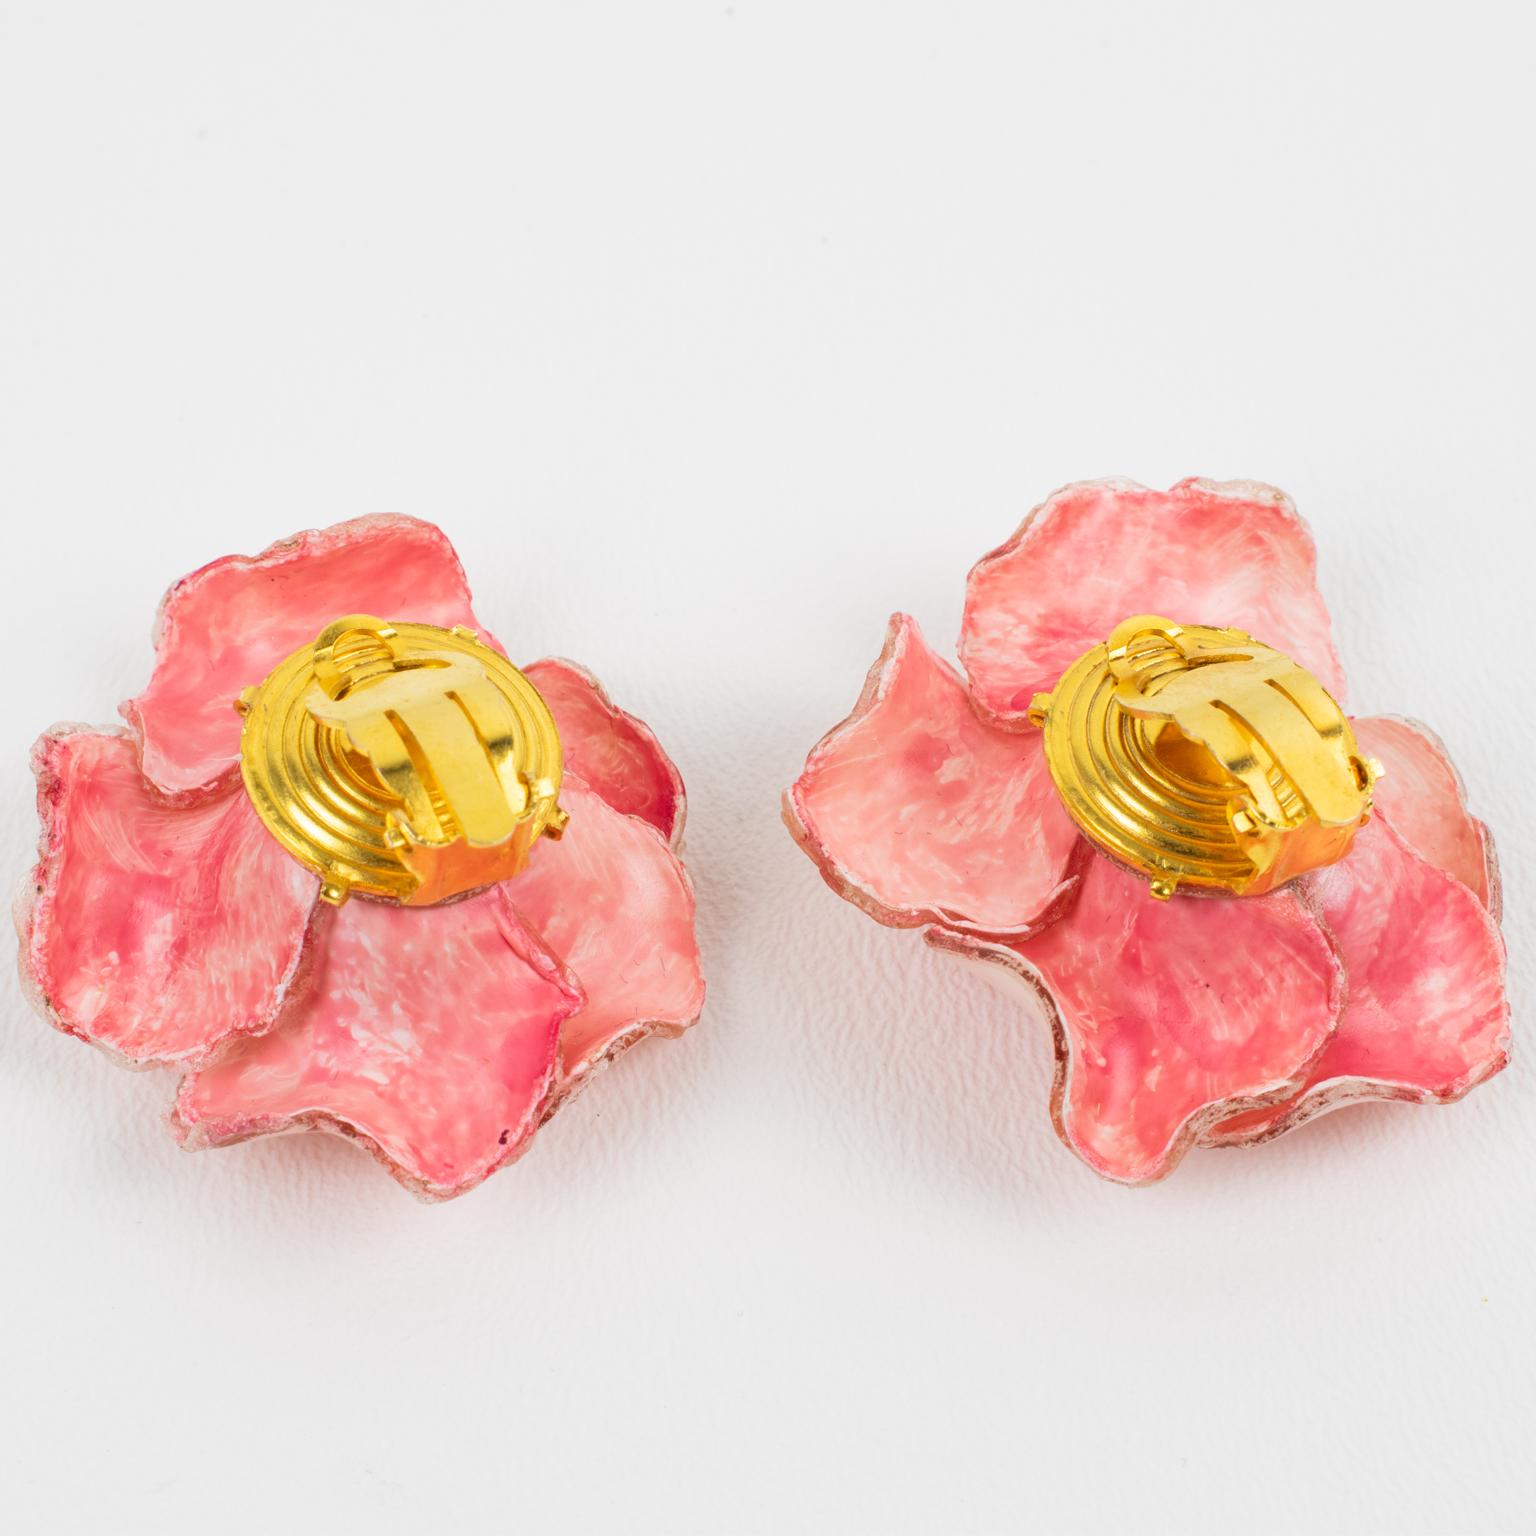 Francoise Montague Paris by Cilea Clip Earrings Resin Pink Rose In Excellent Condition For Sale In Atlanta, GA